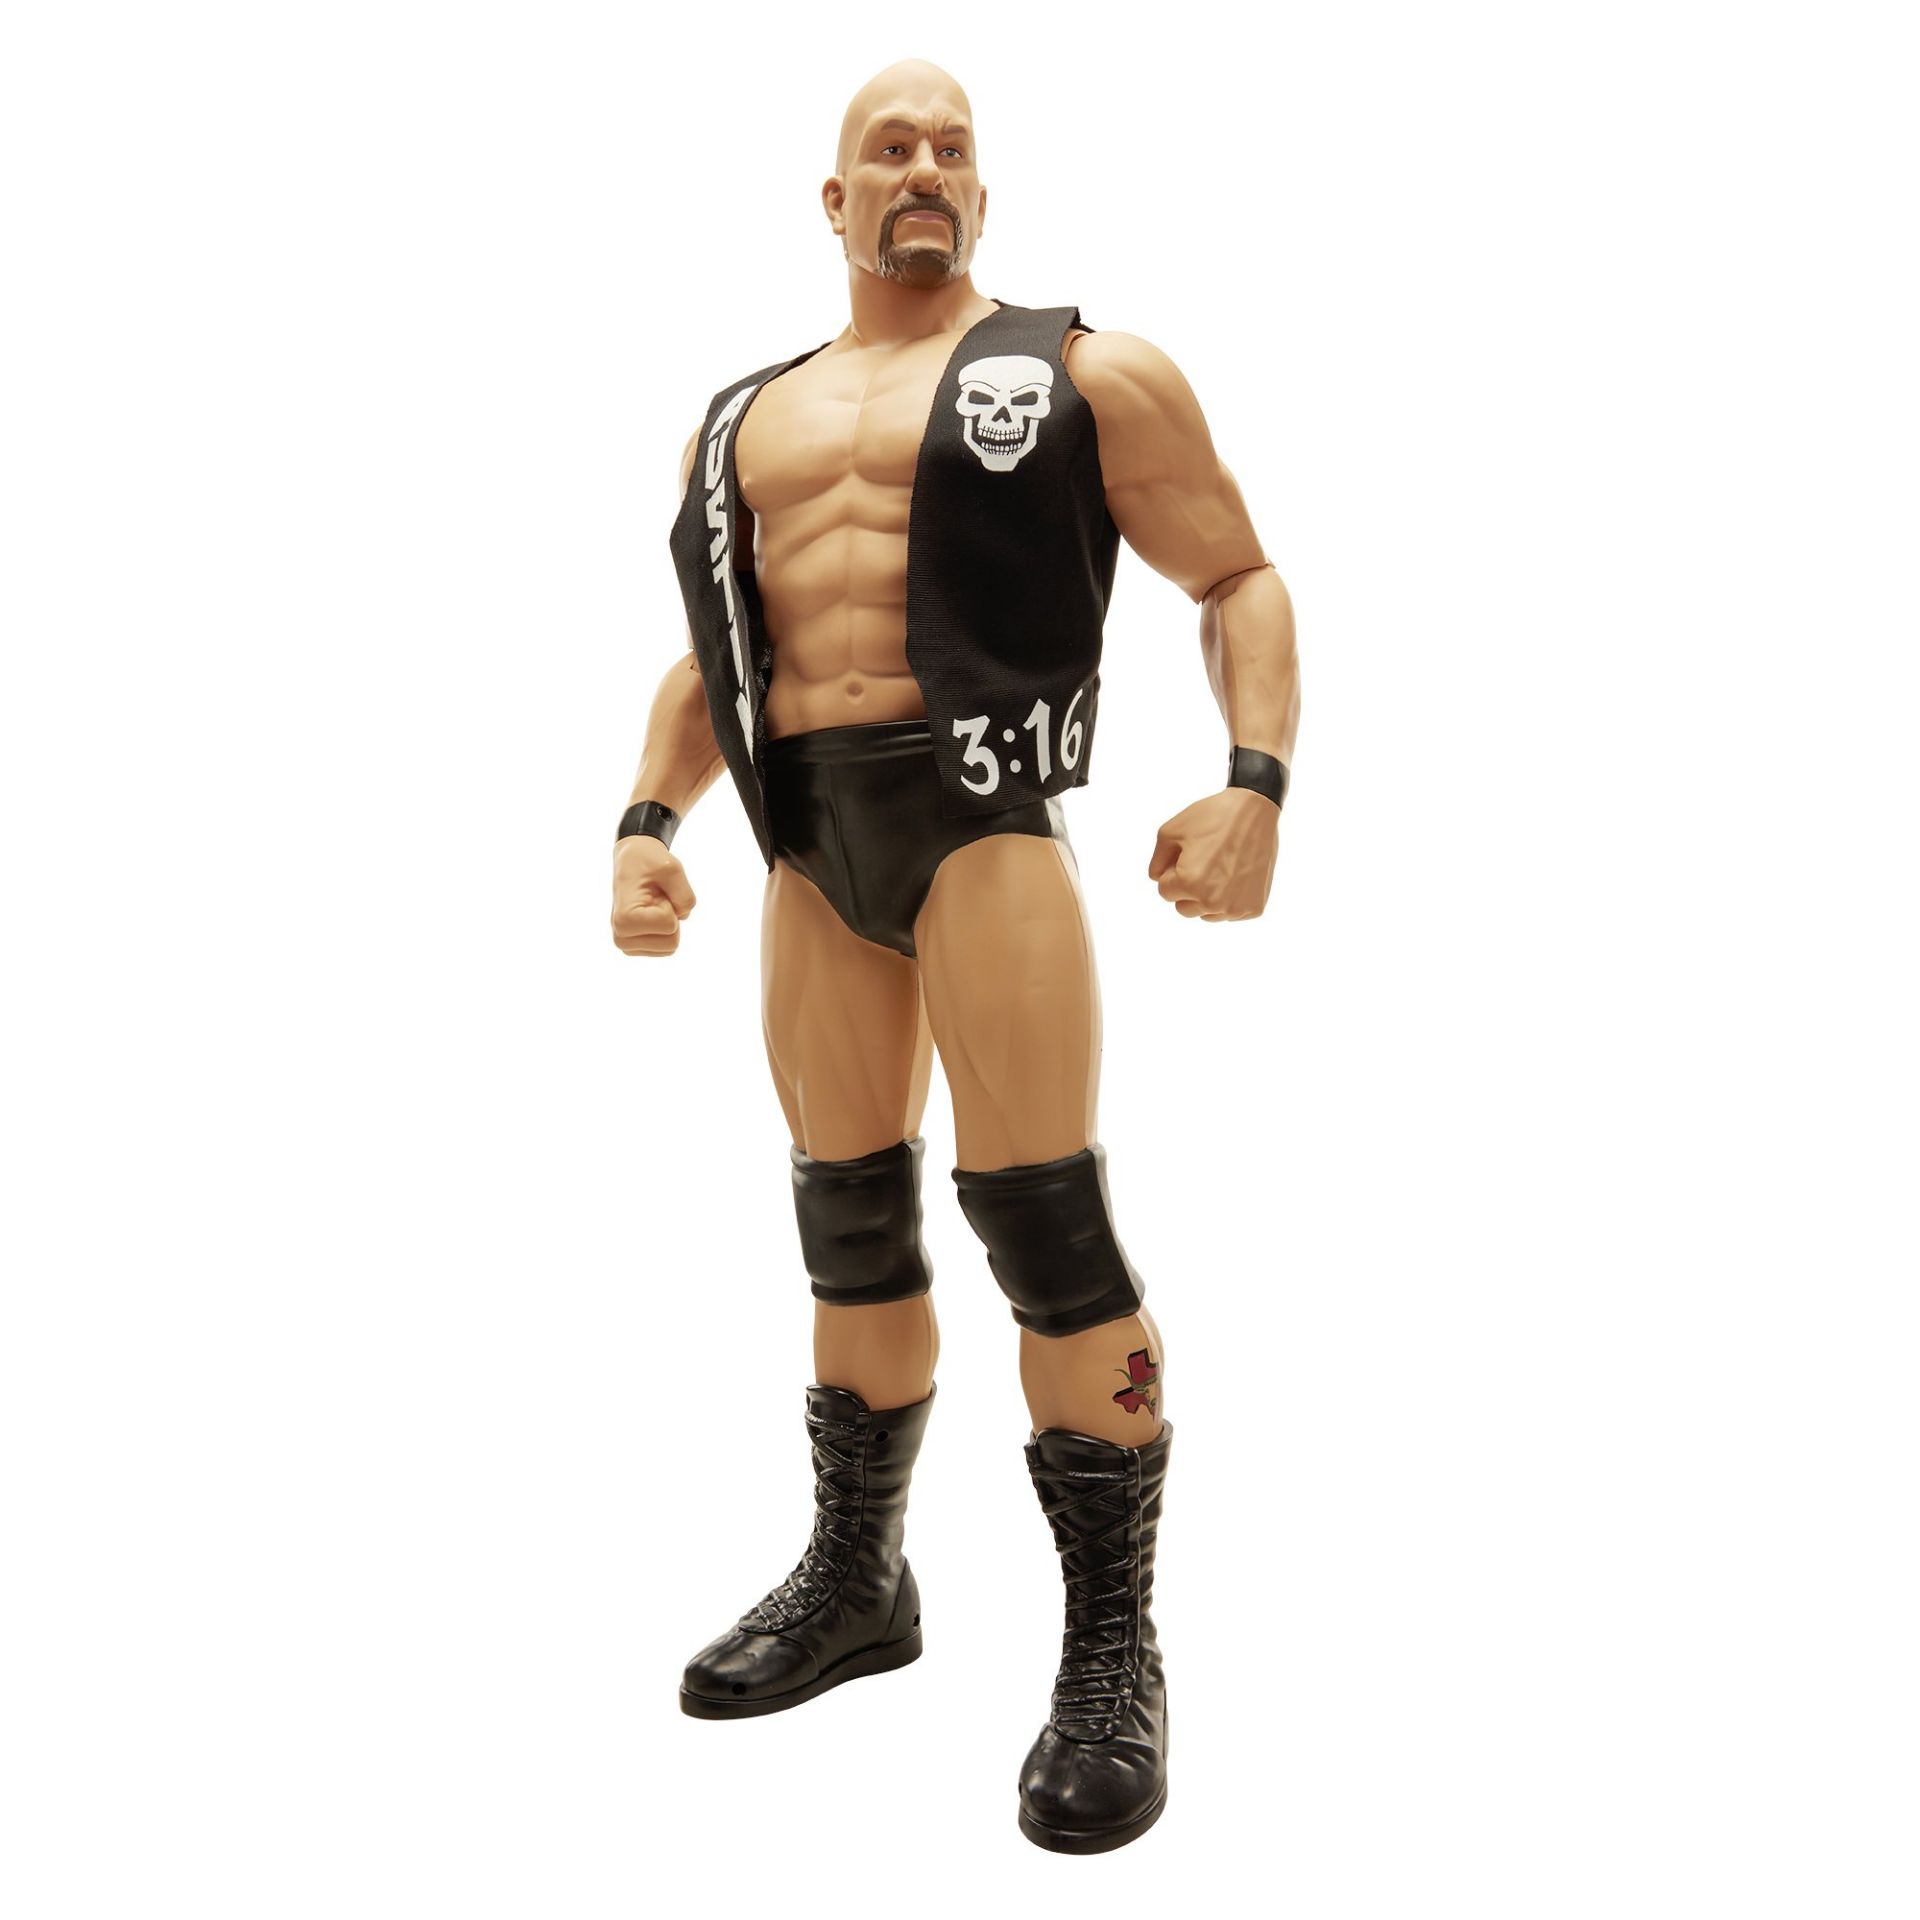 V Brand New Massive 31" WWE Stone Cold Steve Austin Action Figures - 3count.co.uk Price £28.99 - 8 - Image 6 of 8